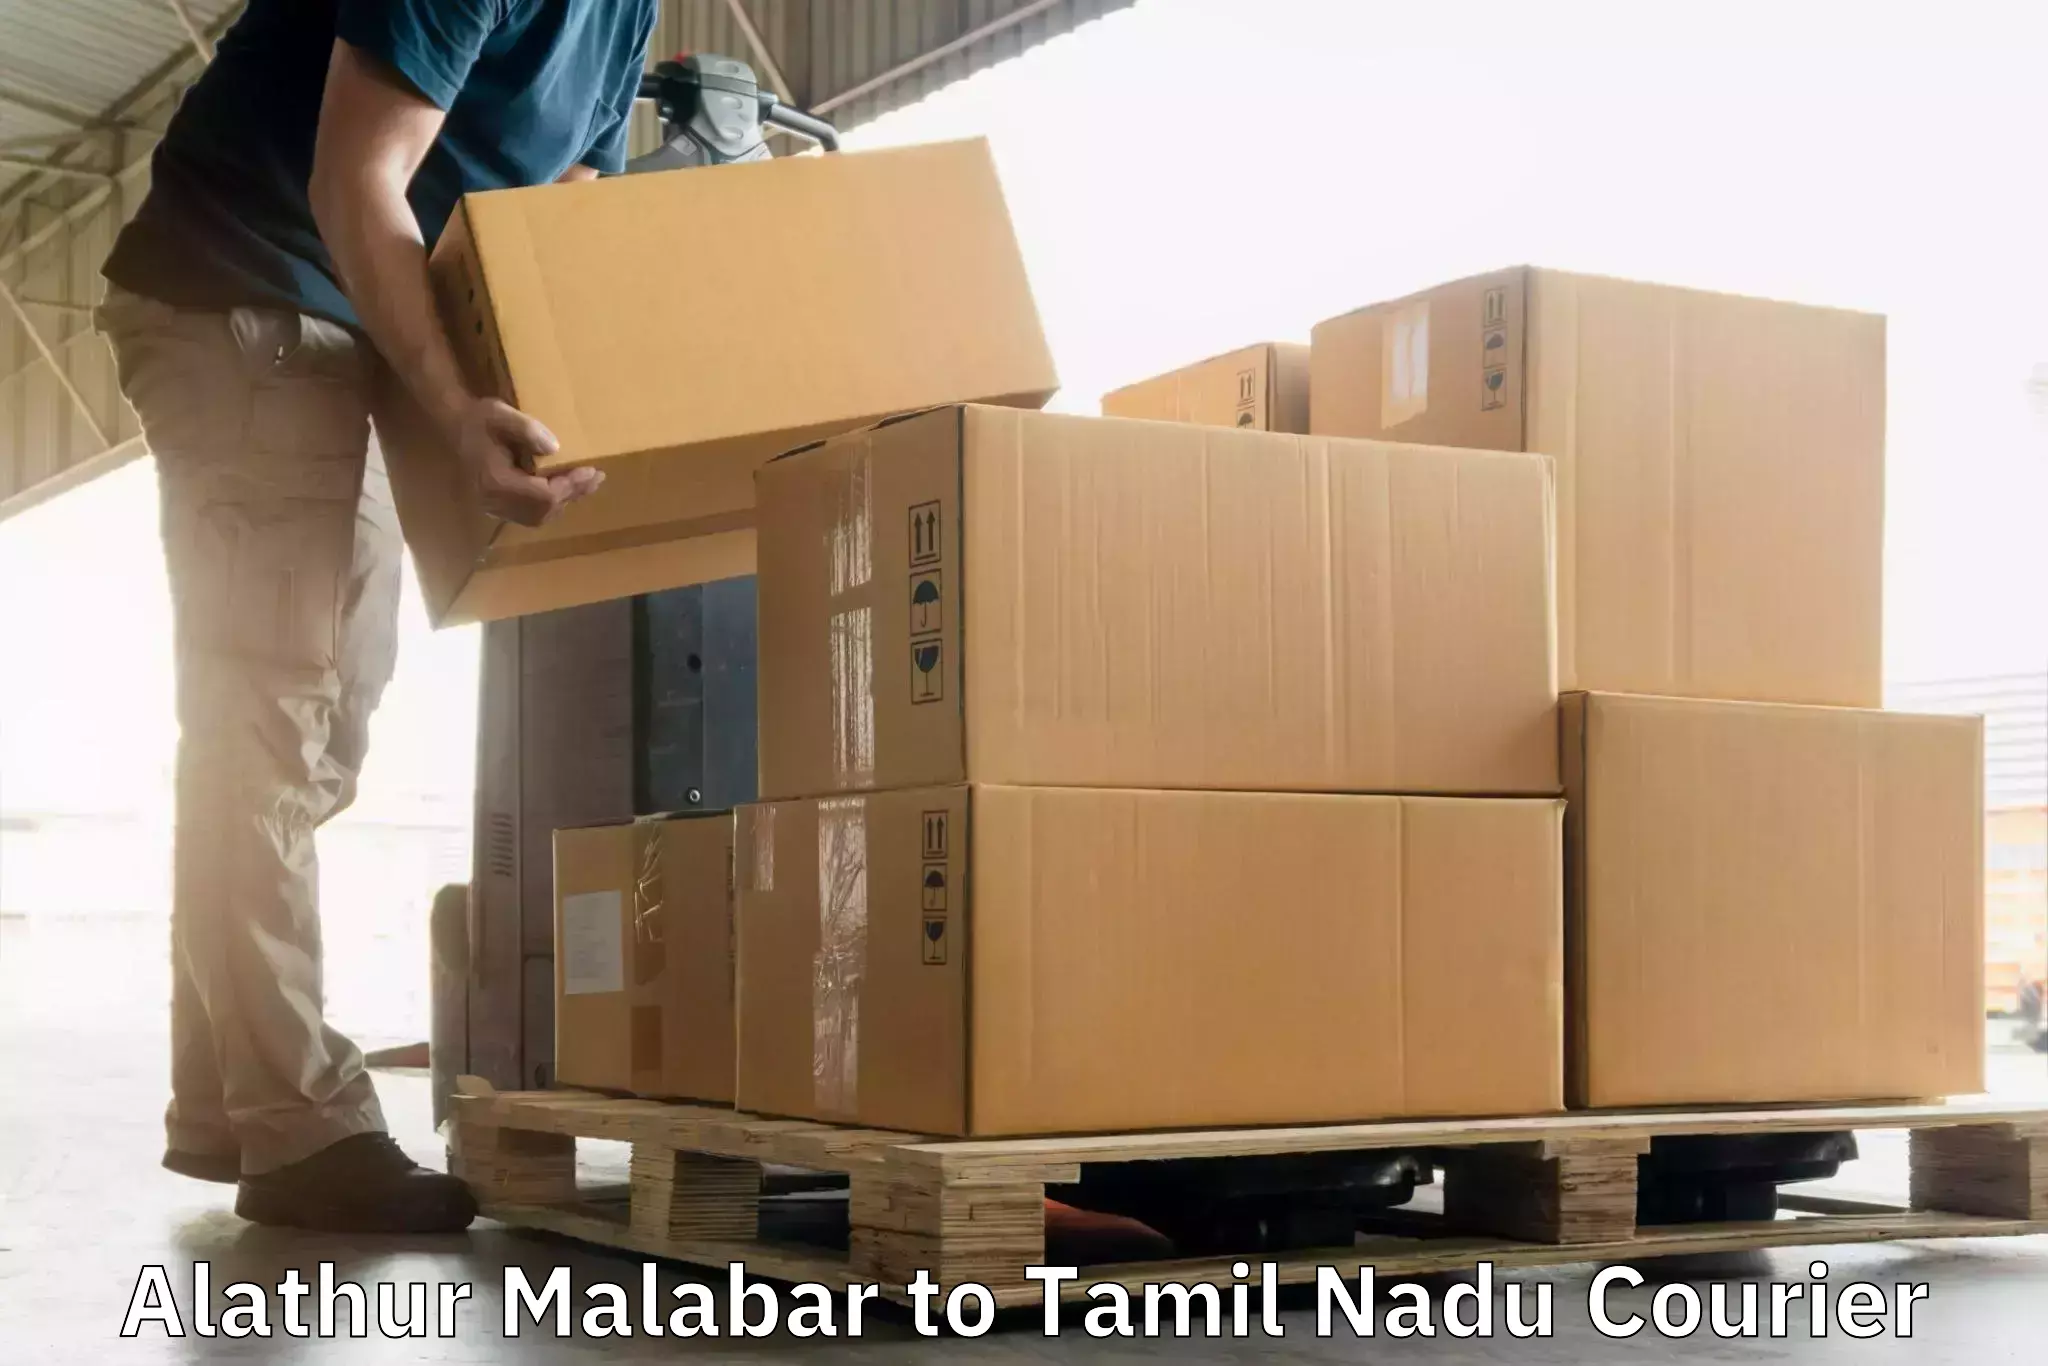 Specialized courier services Alathur Malabar to Thiruthuraipoondi